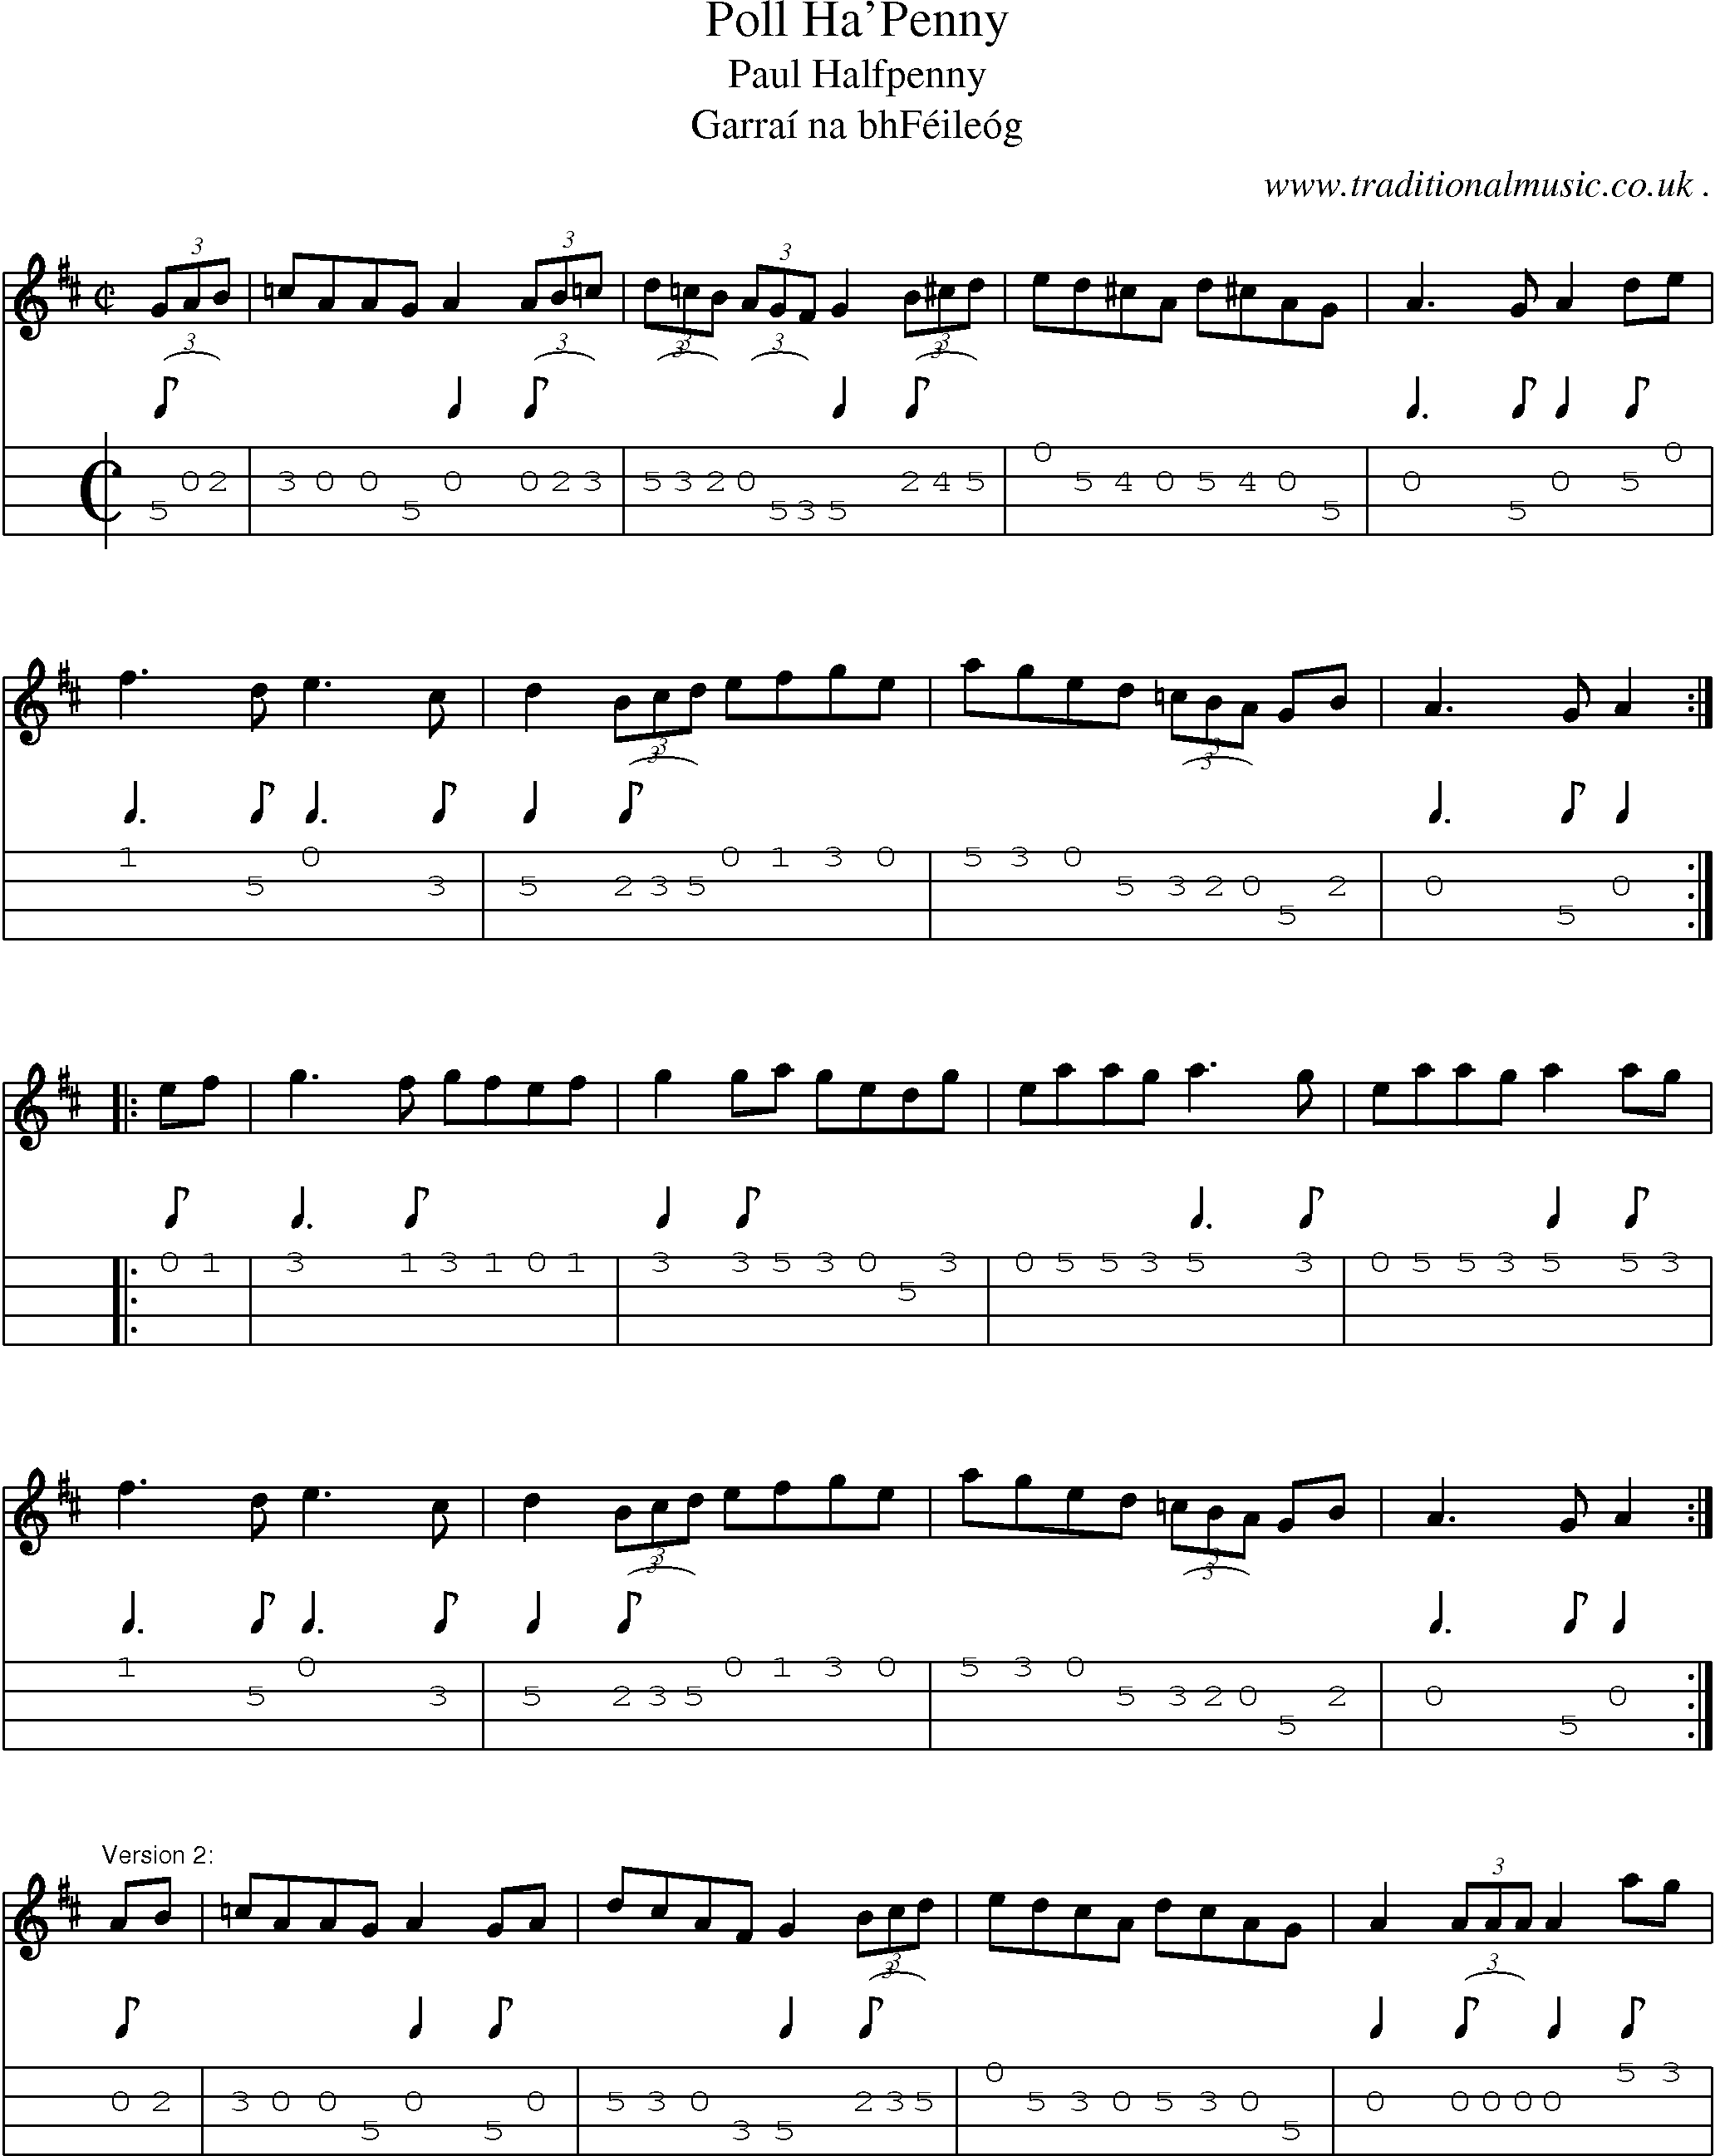 Sheet-Music and Mandolin Tabs for Poll Hapenny